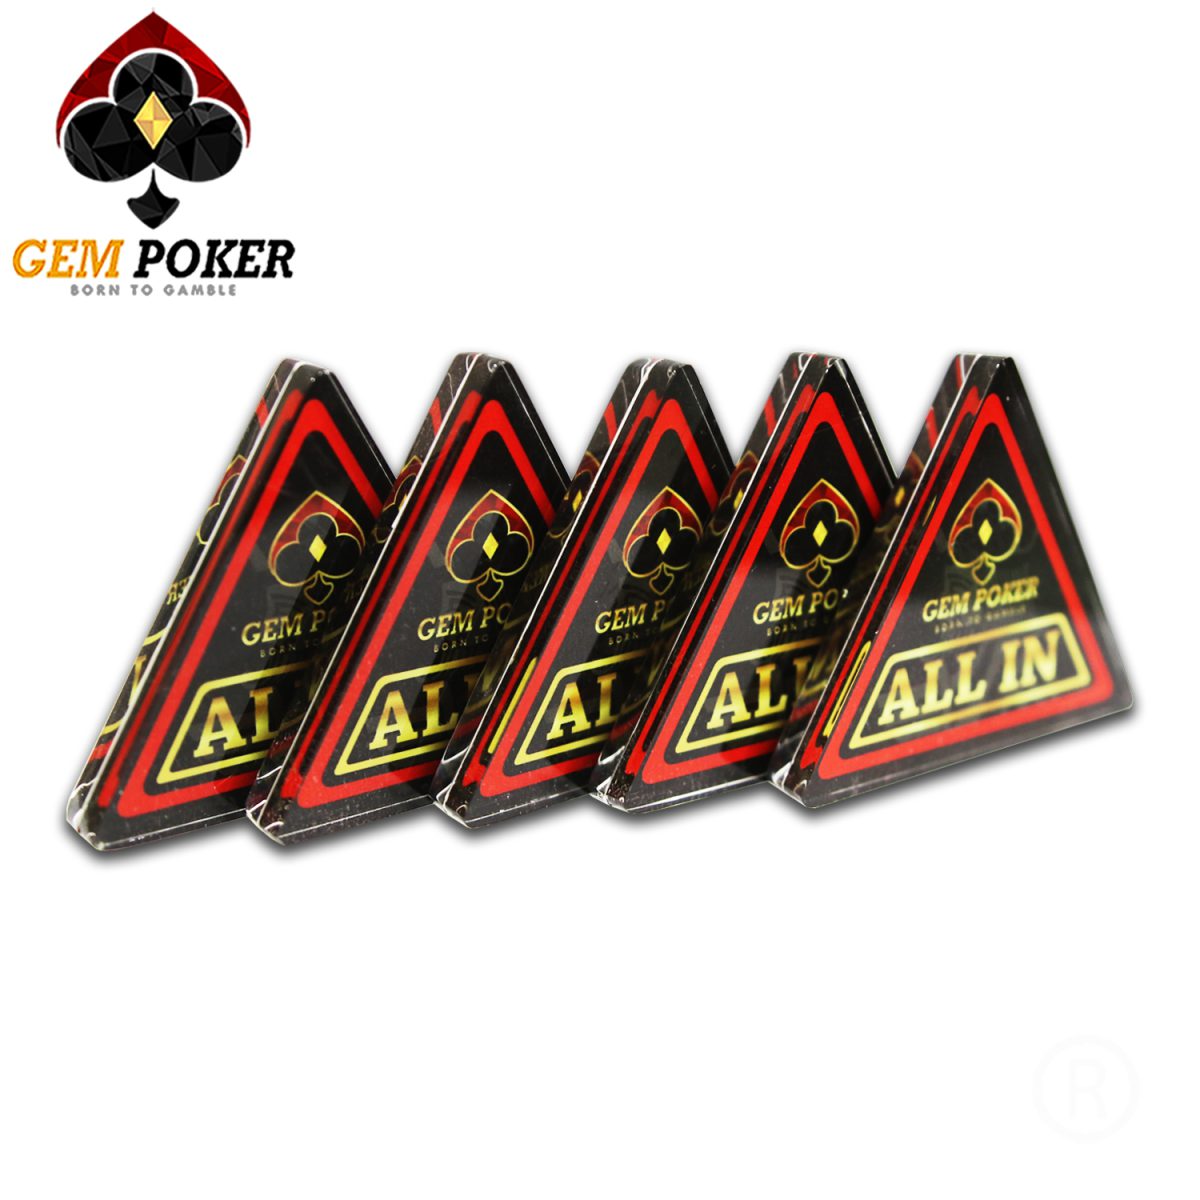 ALL-IN BUTTON GEMPOKER - 02